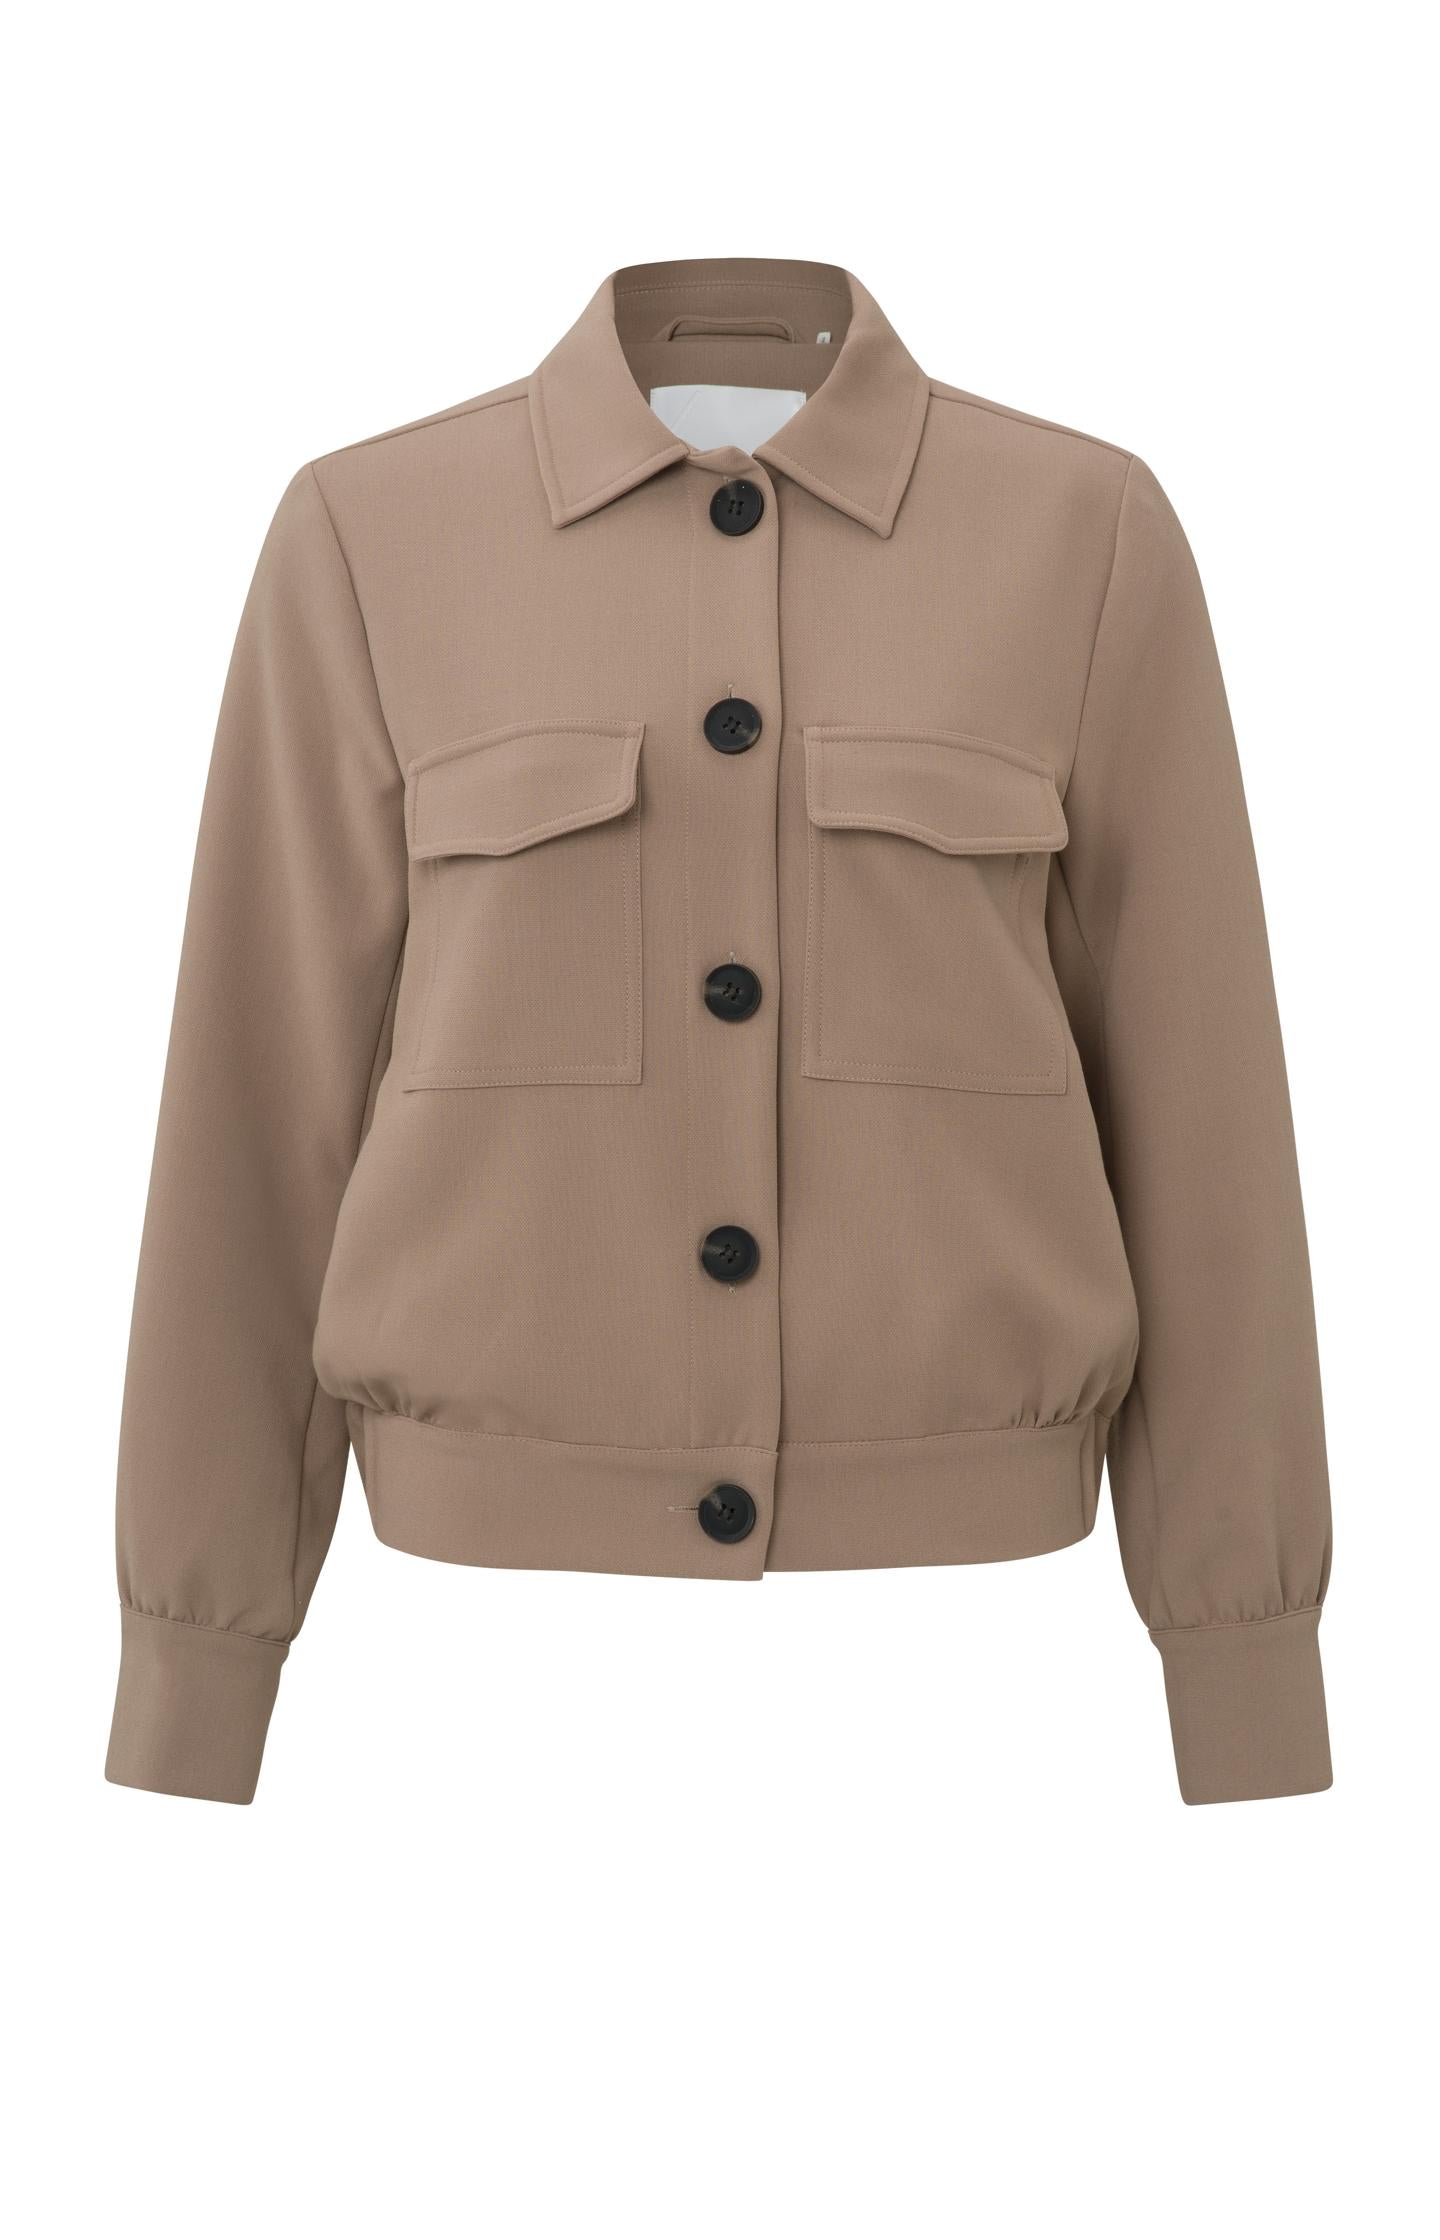 Woven jacket with long sleeves, breast pockets and buttons - Type: product